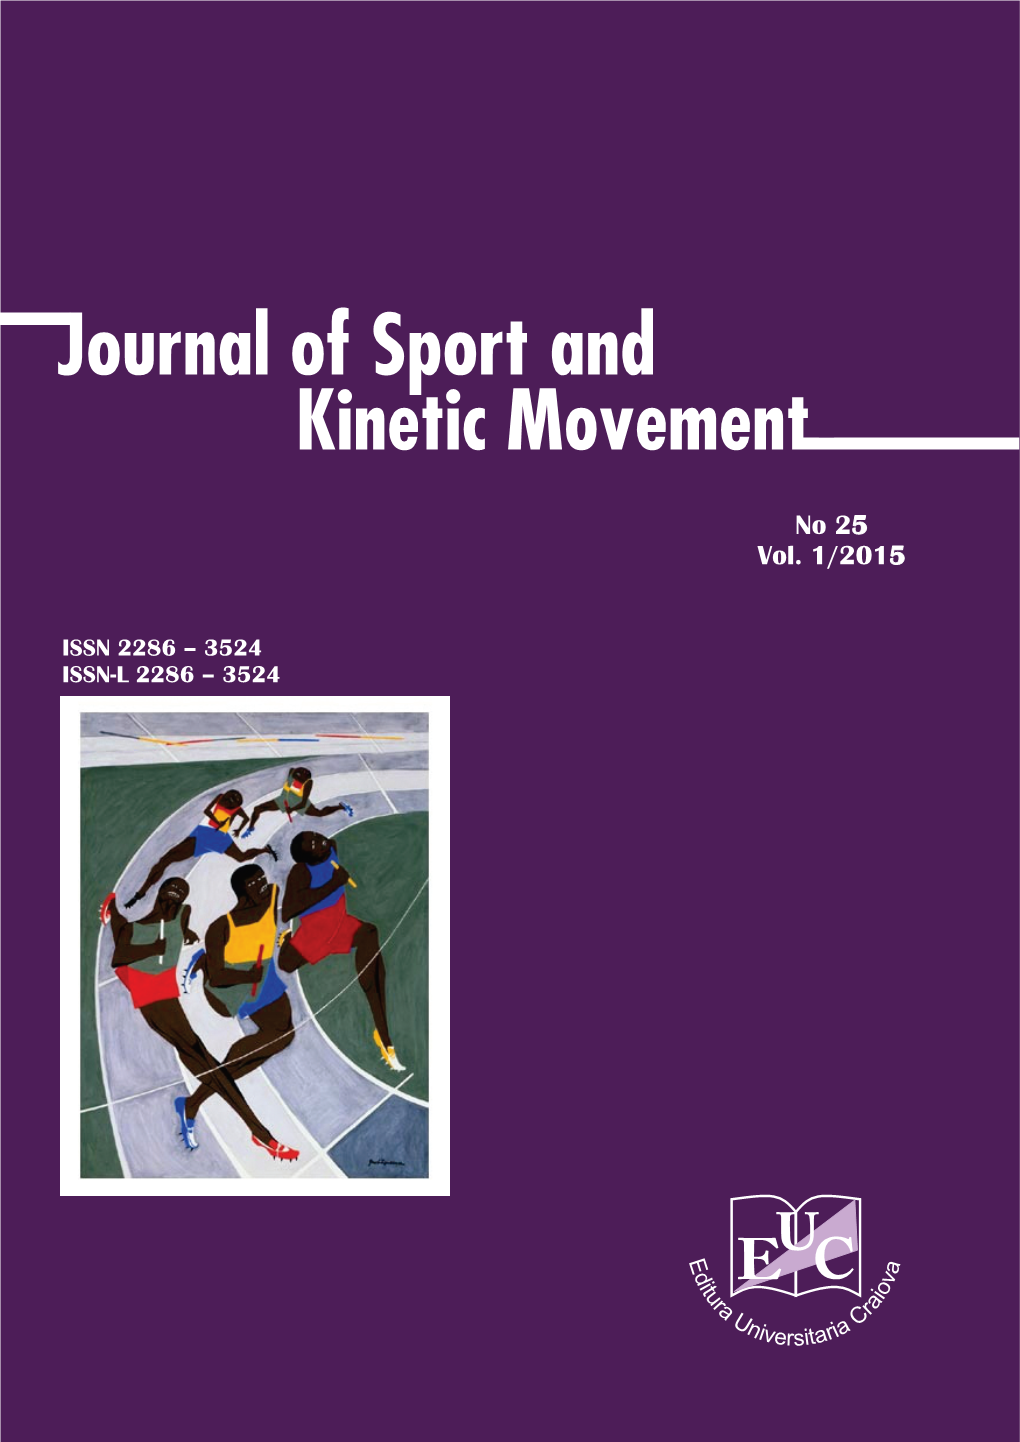 No 25 Vol. 1/2015 Journal of Sport and Kinetic Movement Vol